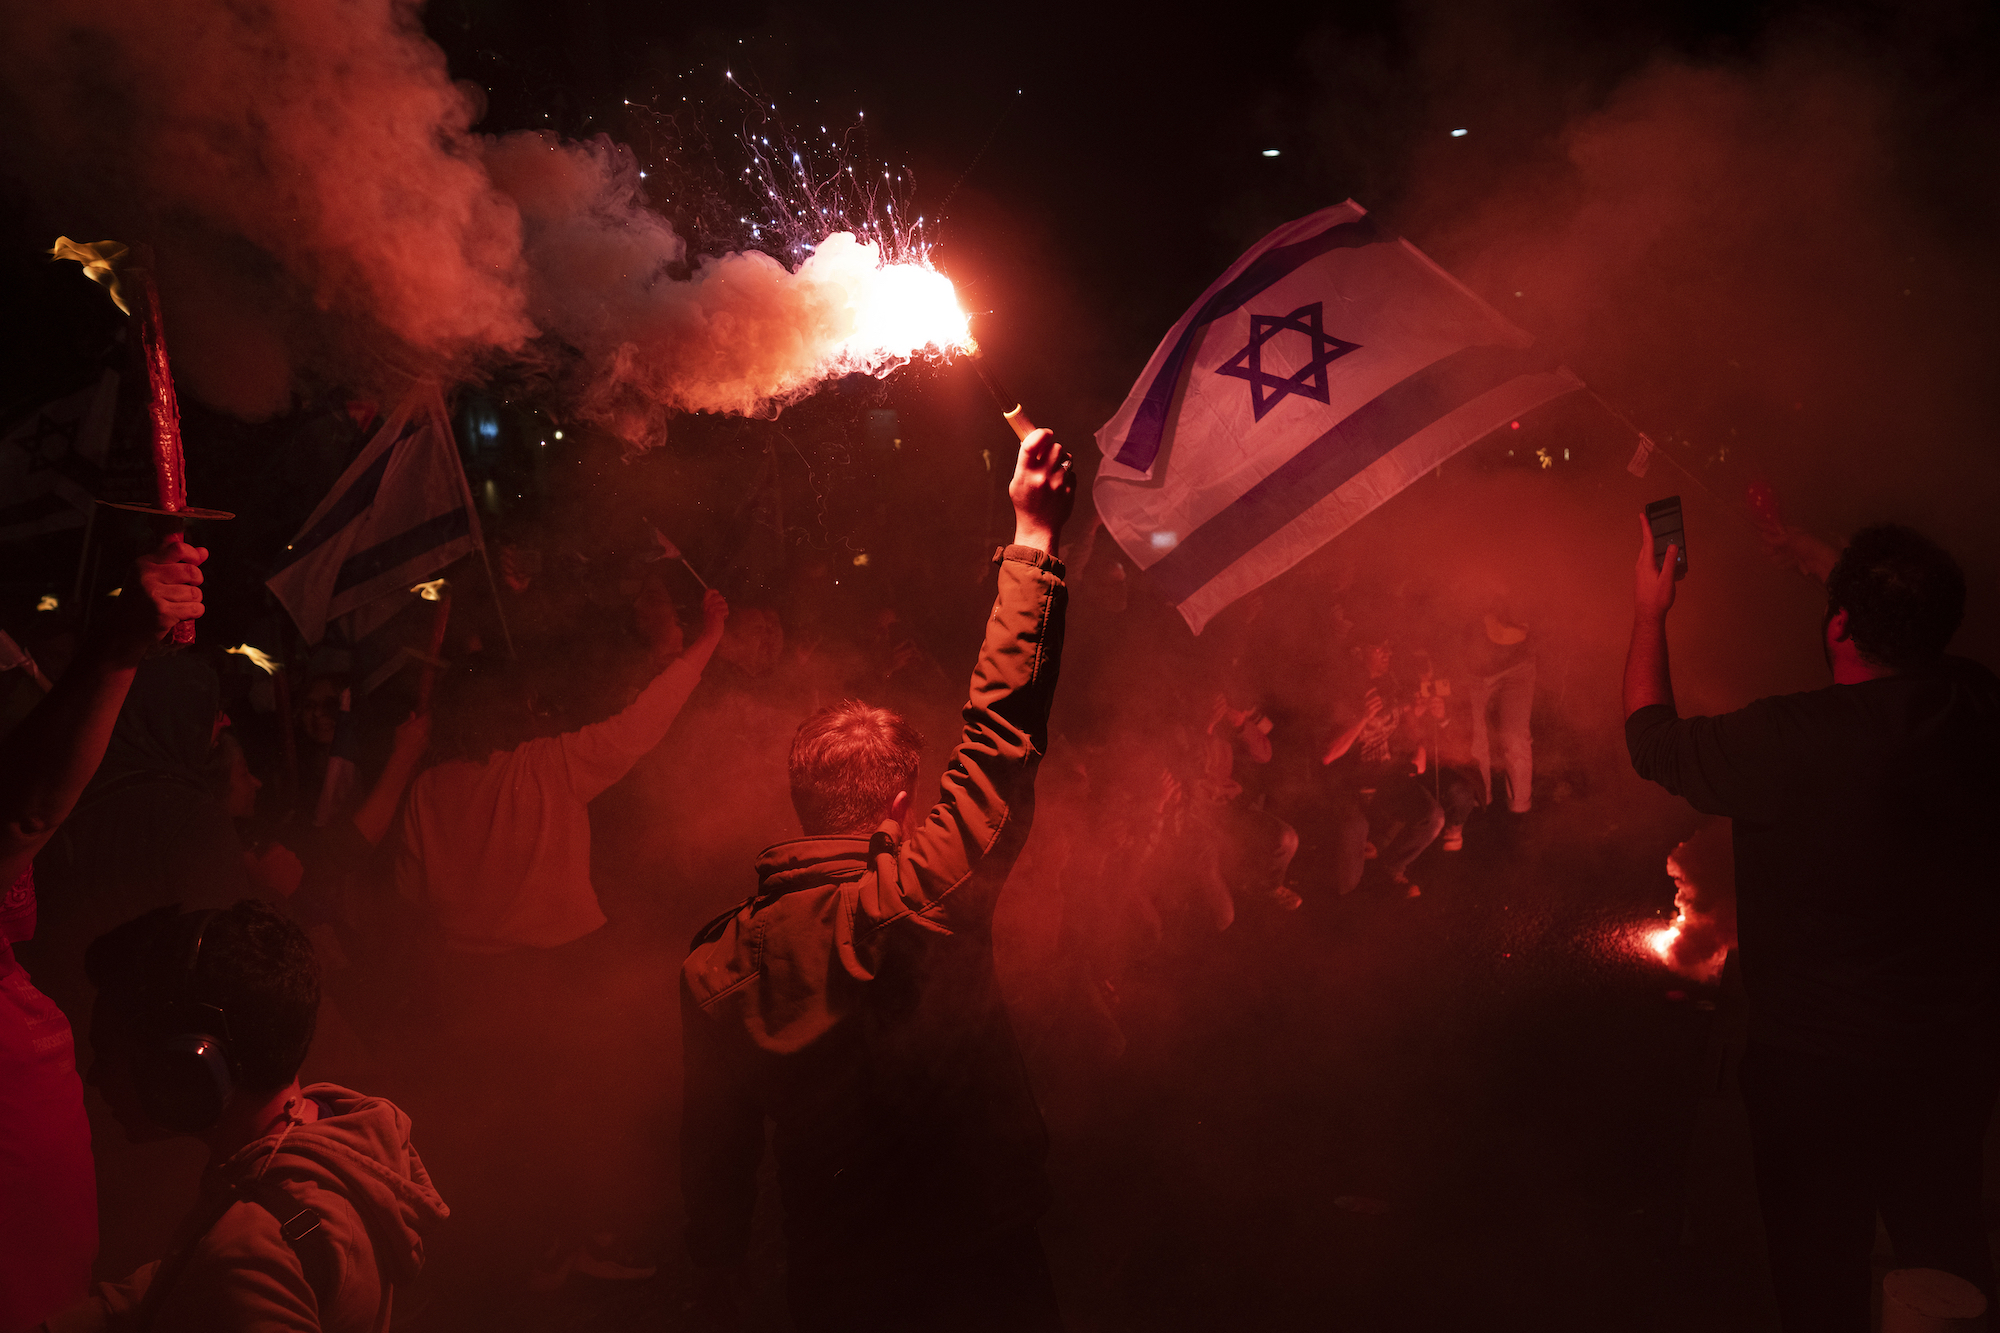 An Israeli protester holds a lit flare giving off a red glow as another waves an Israeli flag in a nighttime protest.